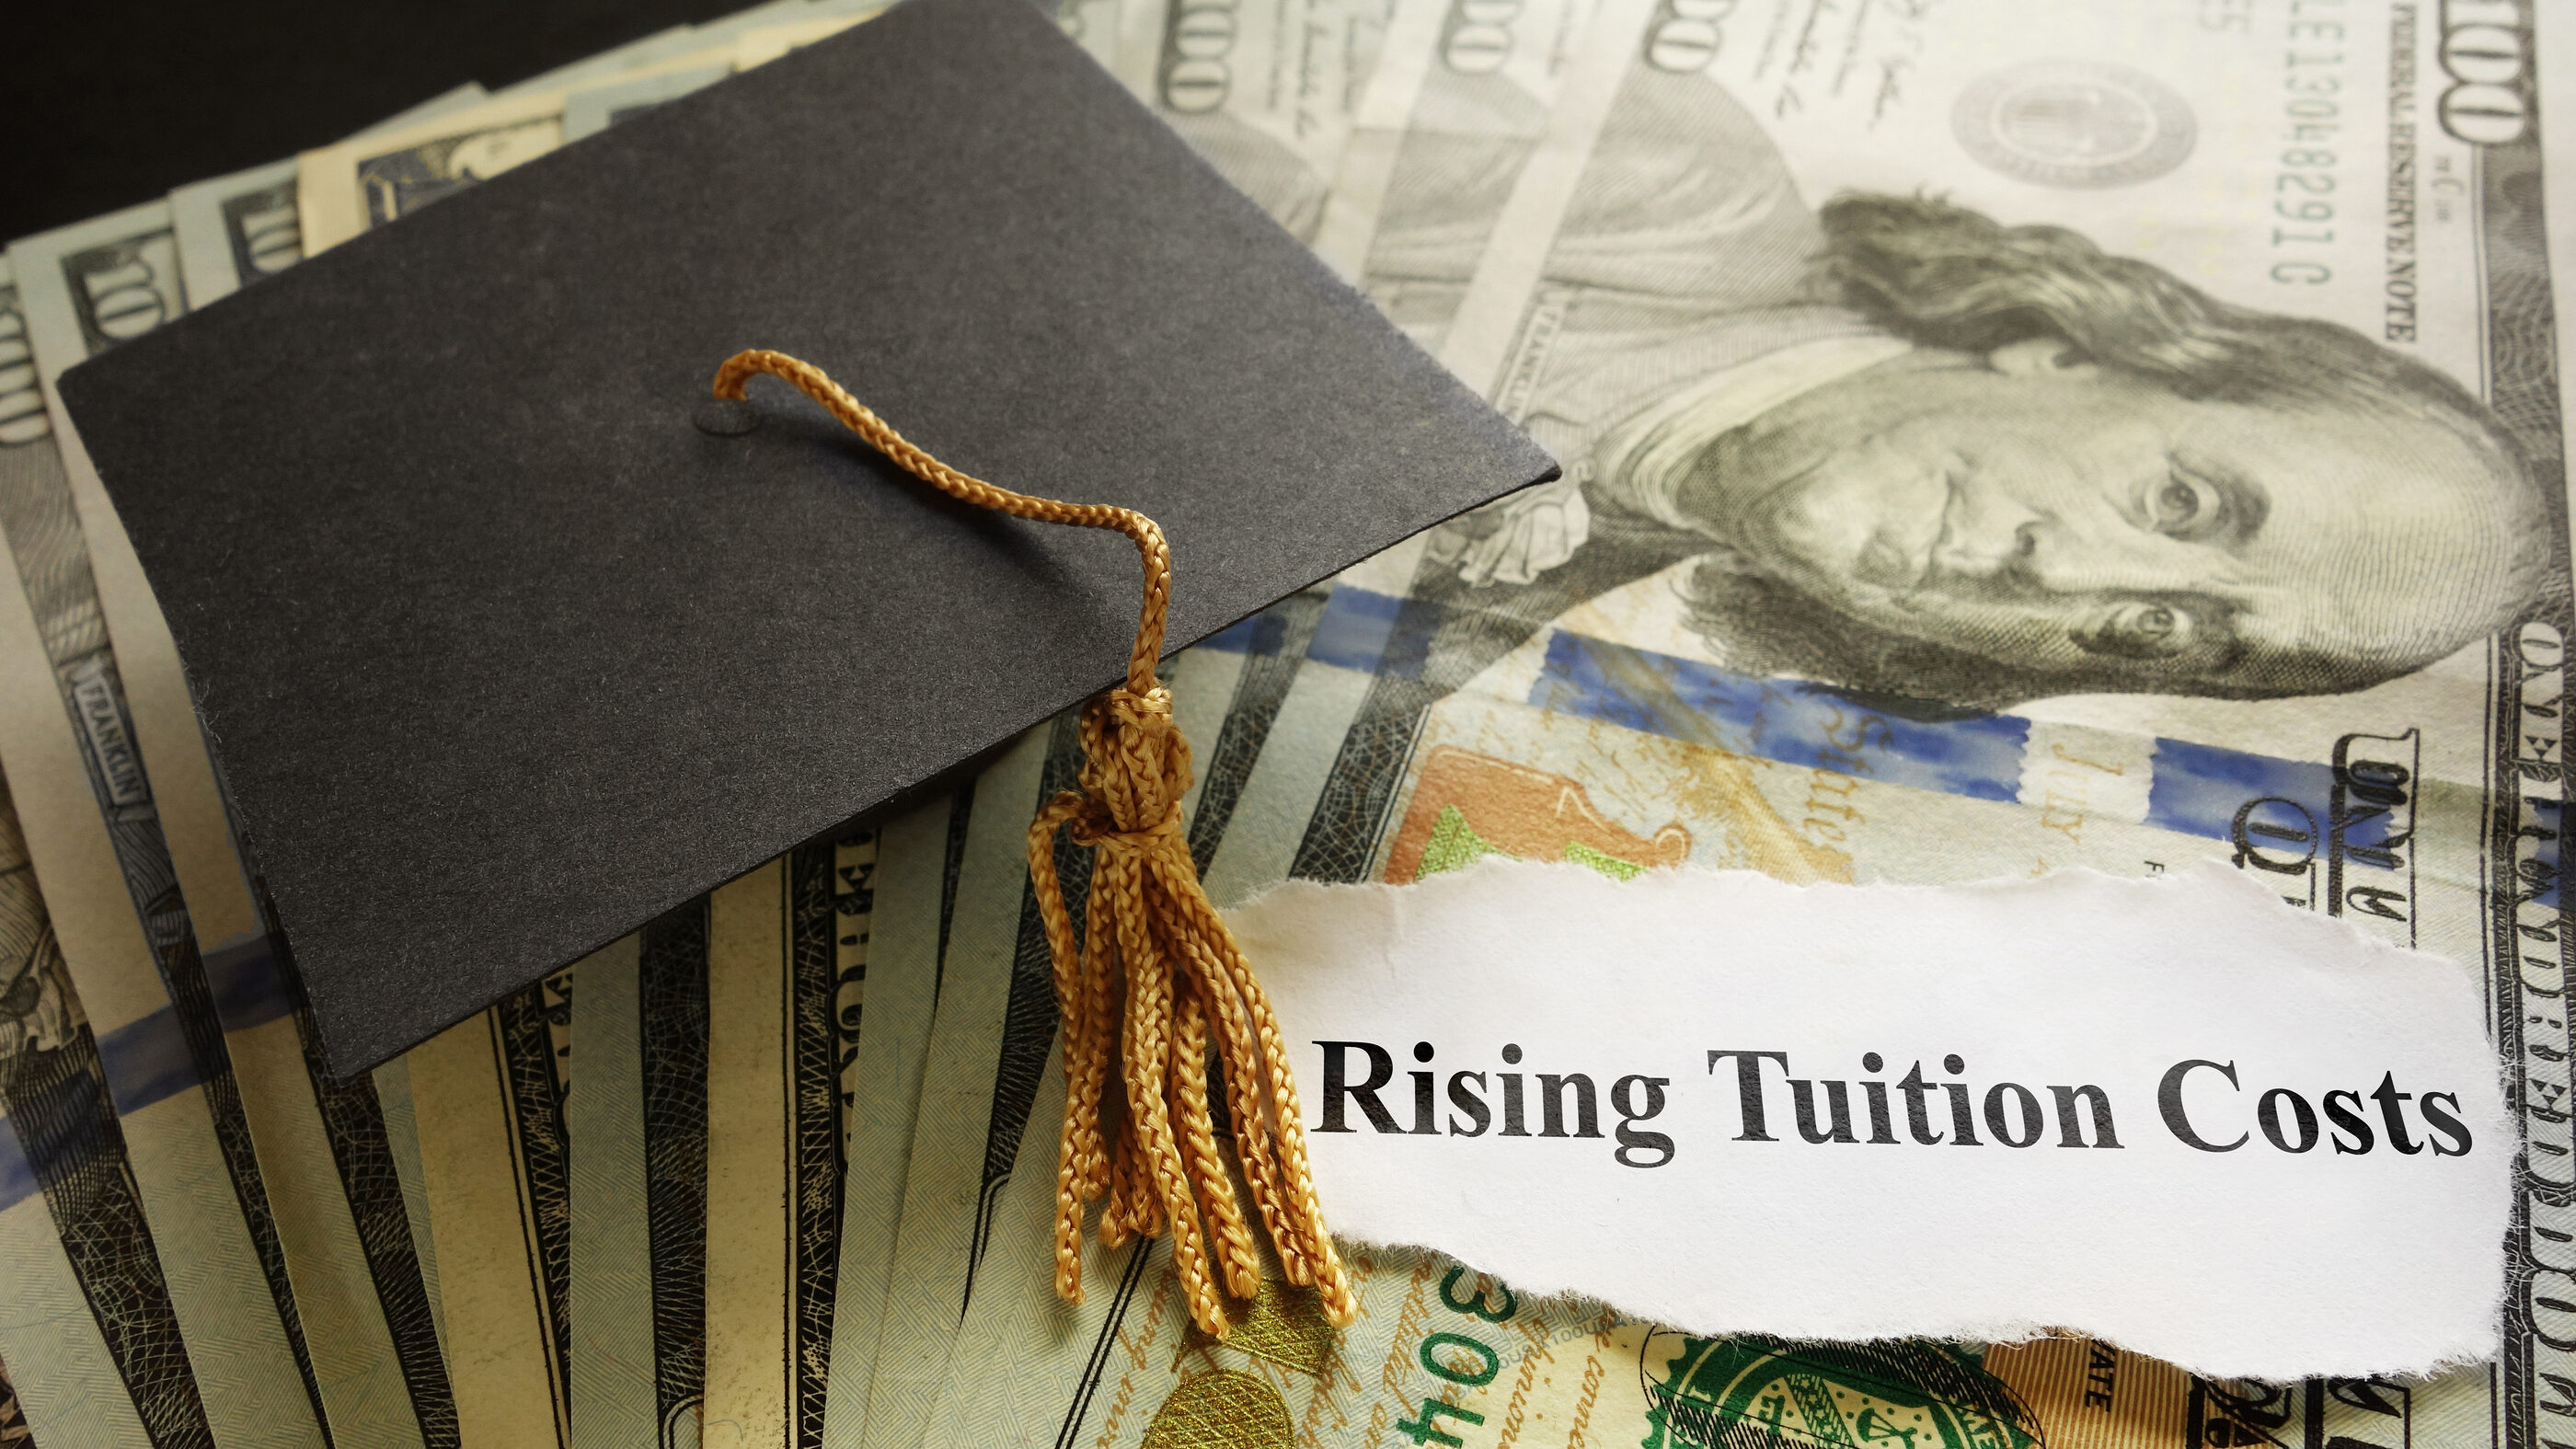 A graduation cap is pictured on a pile of money with text reading "rising tuition costs....